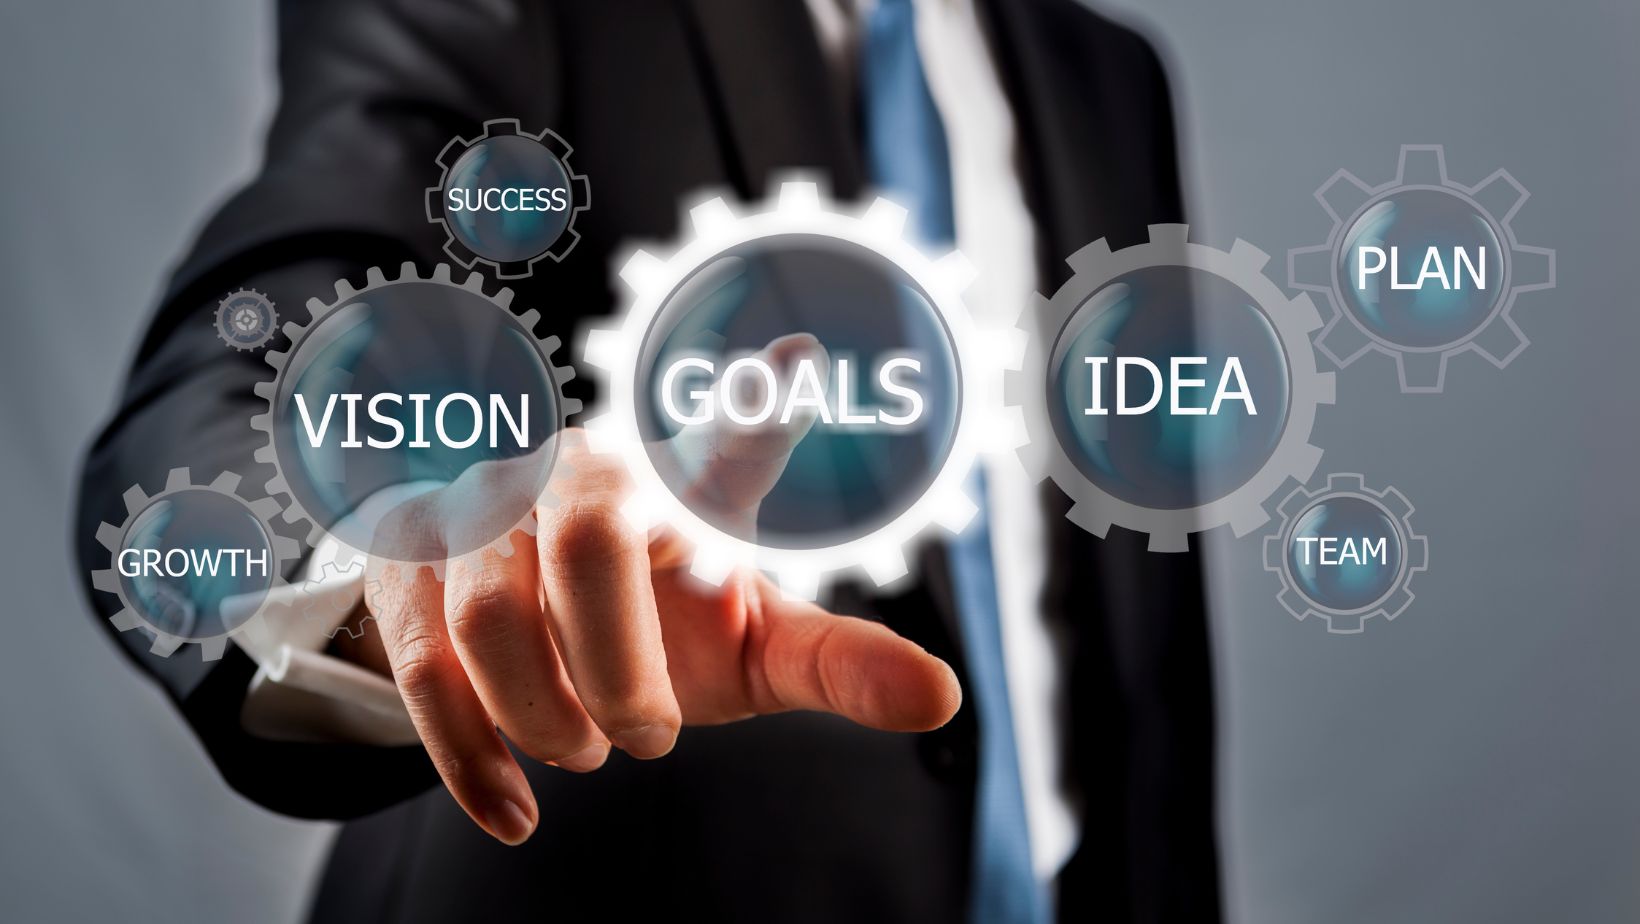 goals are more specific versions of benchmark objectives